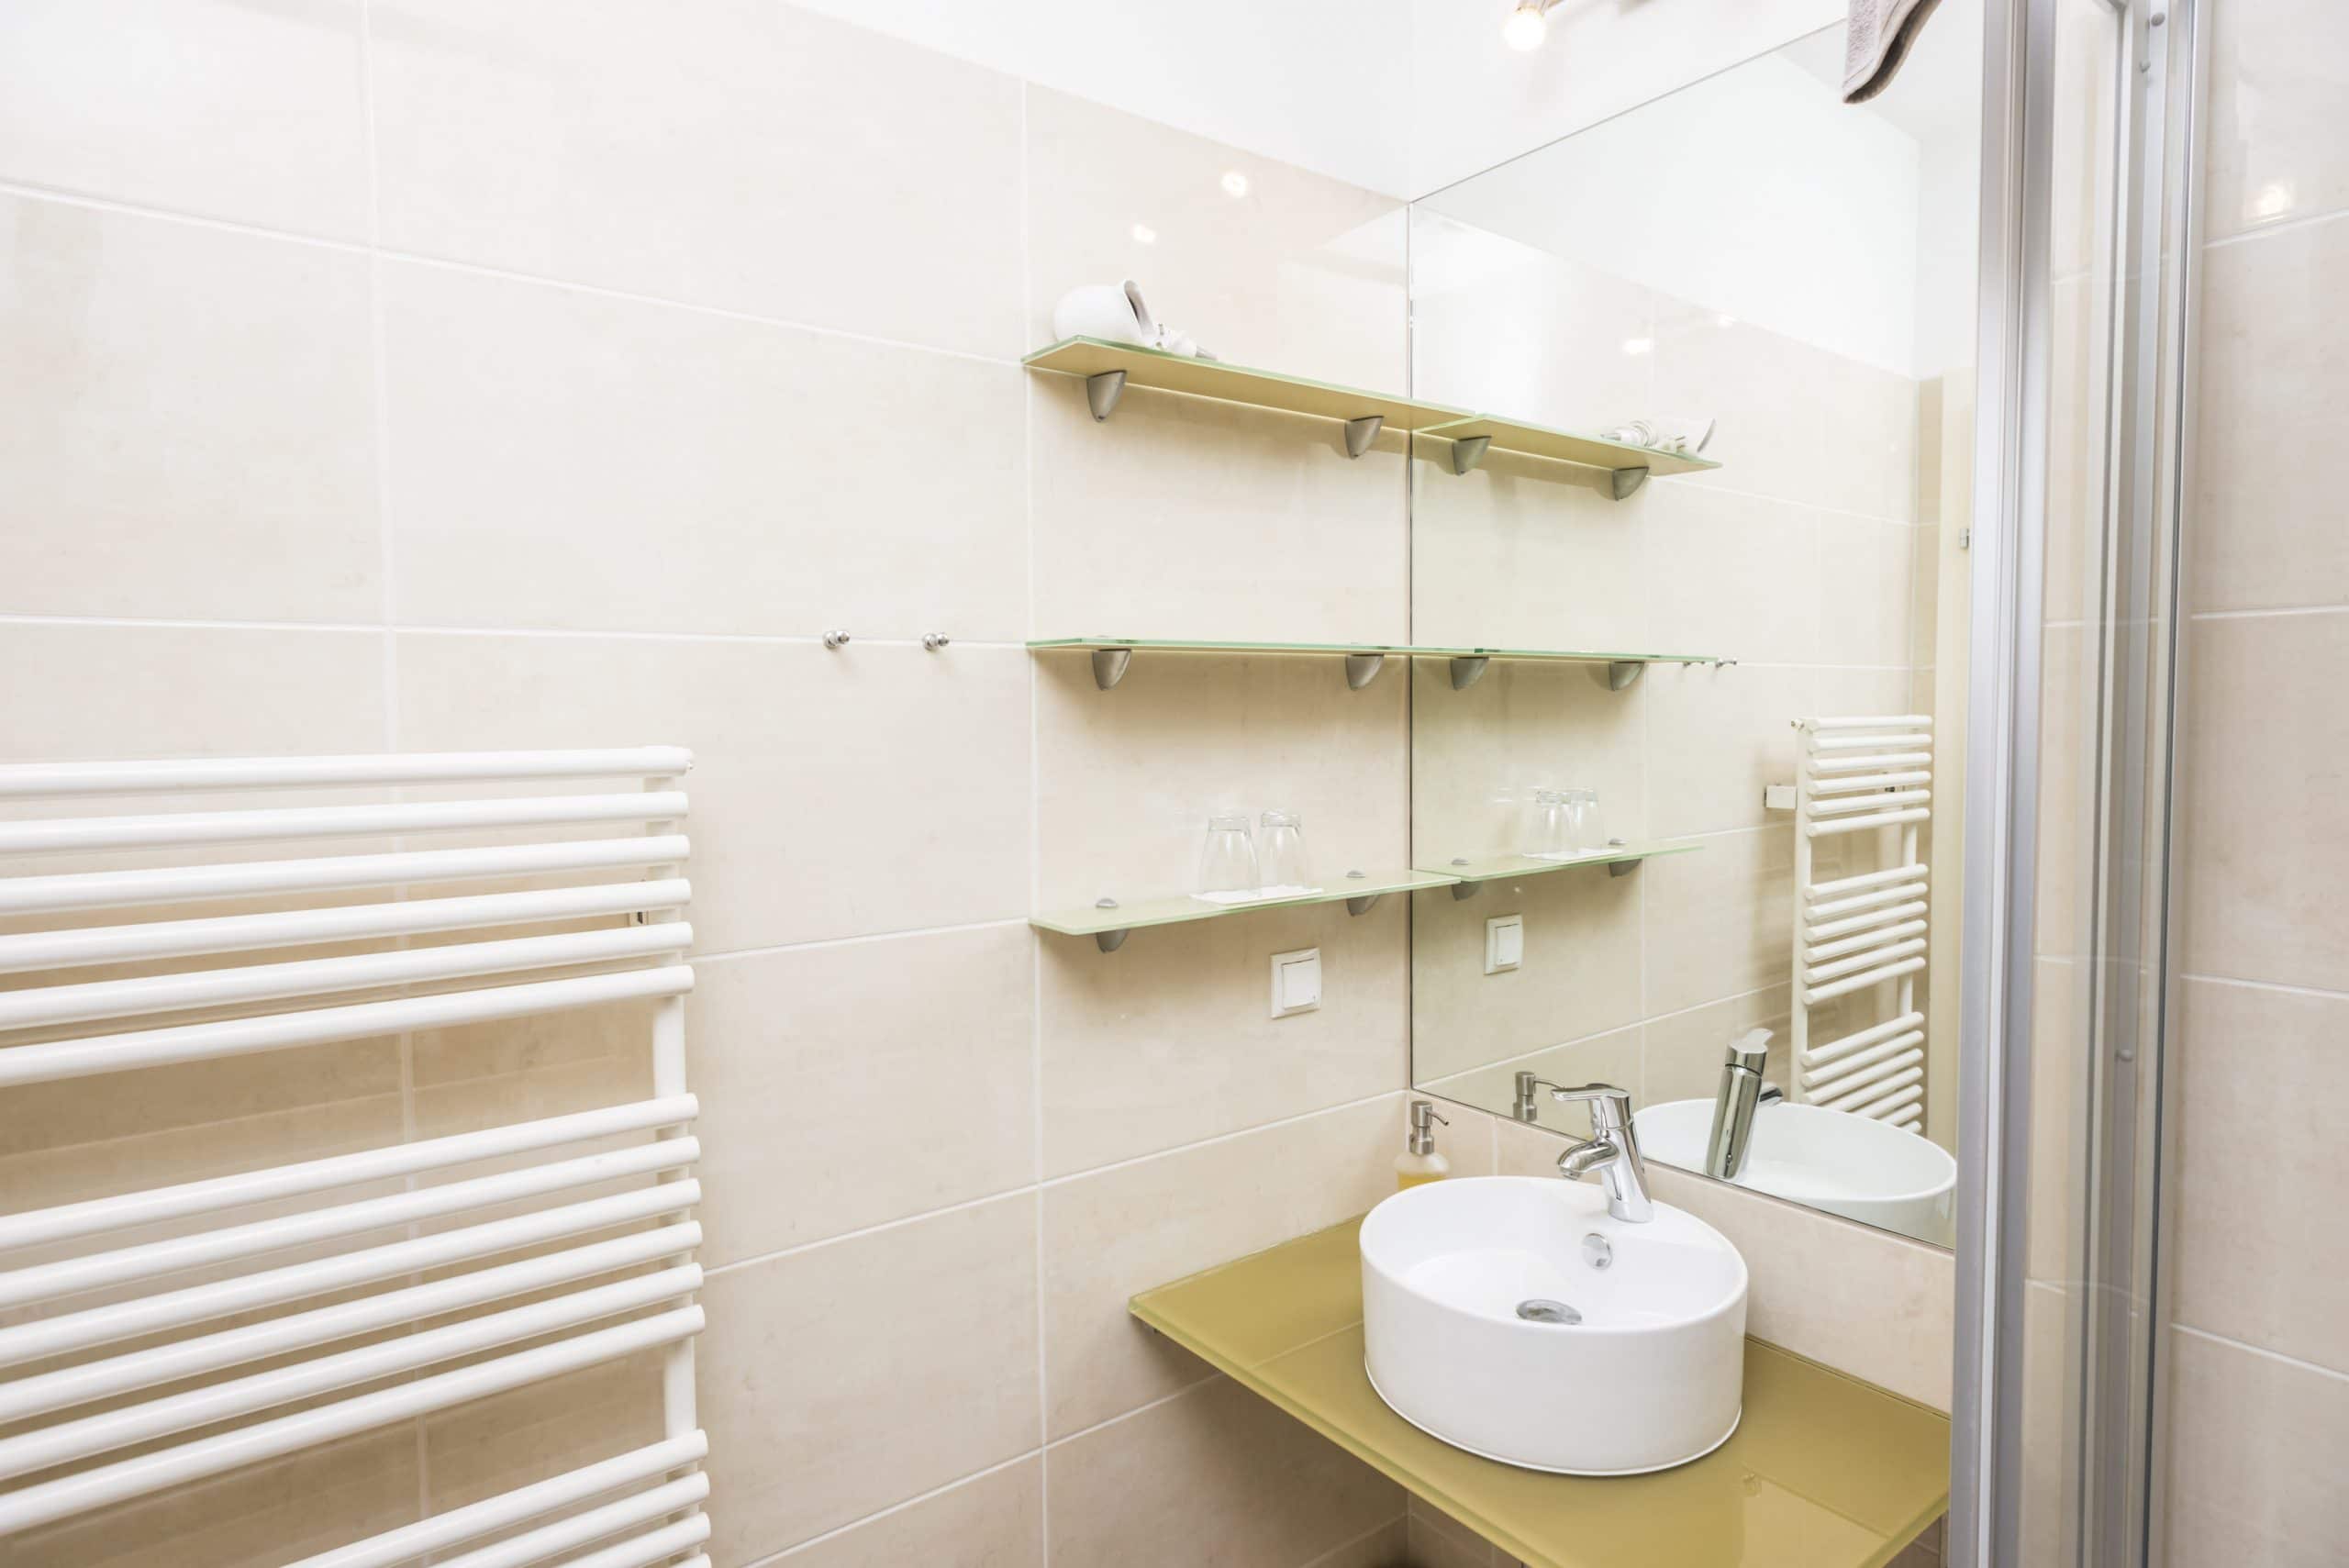 Apartment 5 bathrooms with heated towel rail